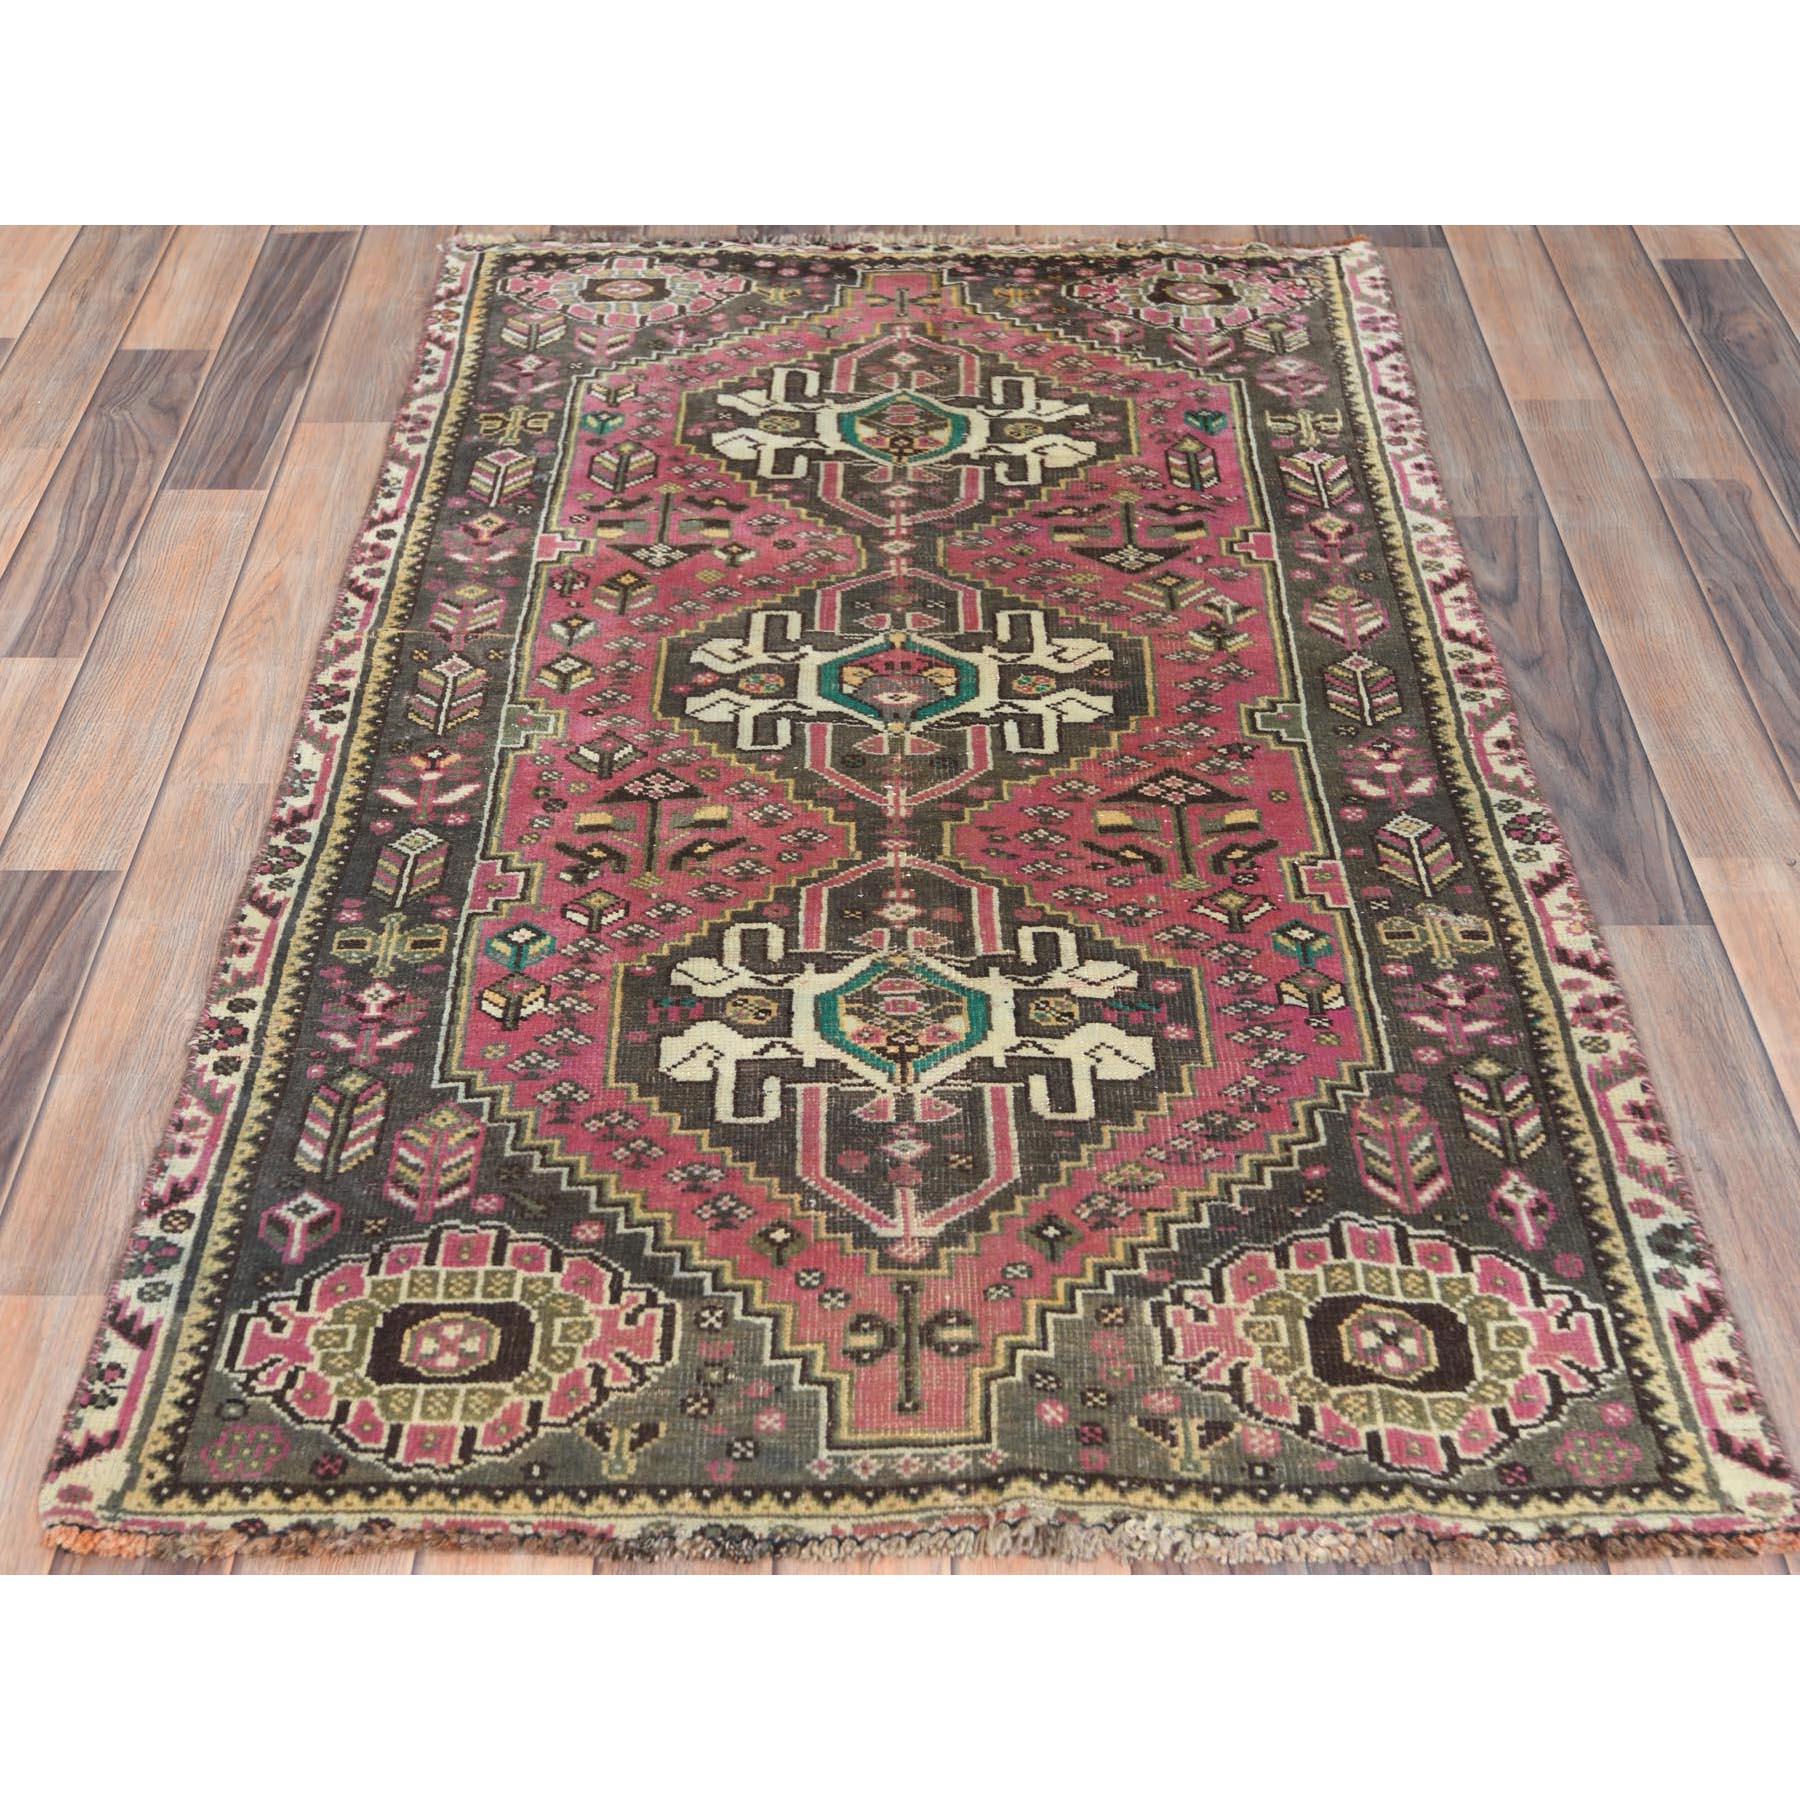 This fabulous hand-knotted carpet has been created and designed for extra strength and durability. This rug has been handcrafted for weeks in the traditional method that is used to make.
Exact rug size in feet and inches : 3'1